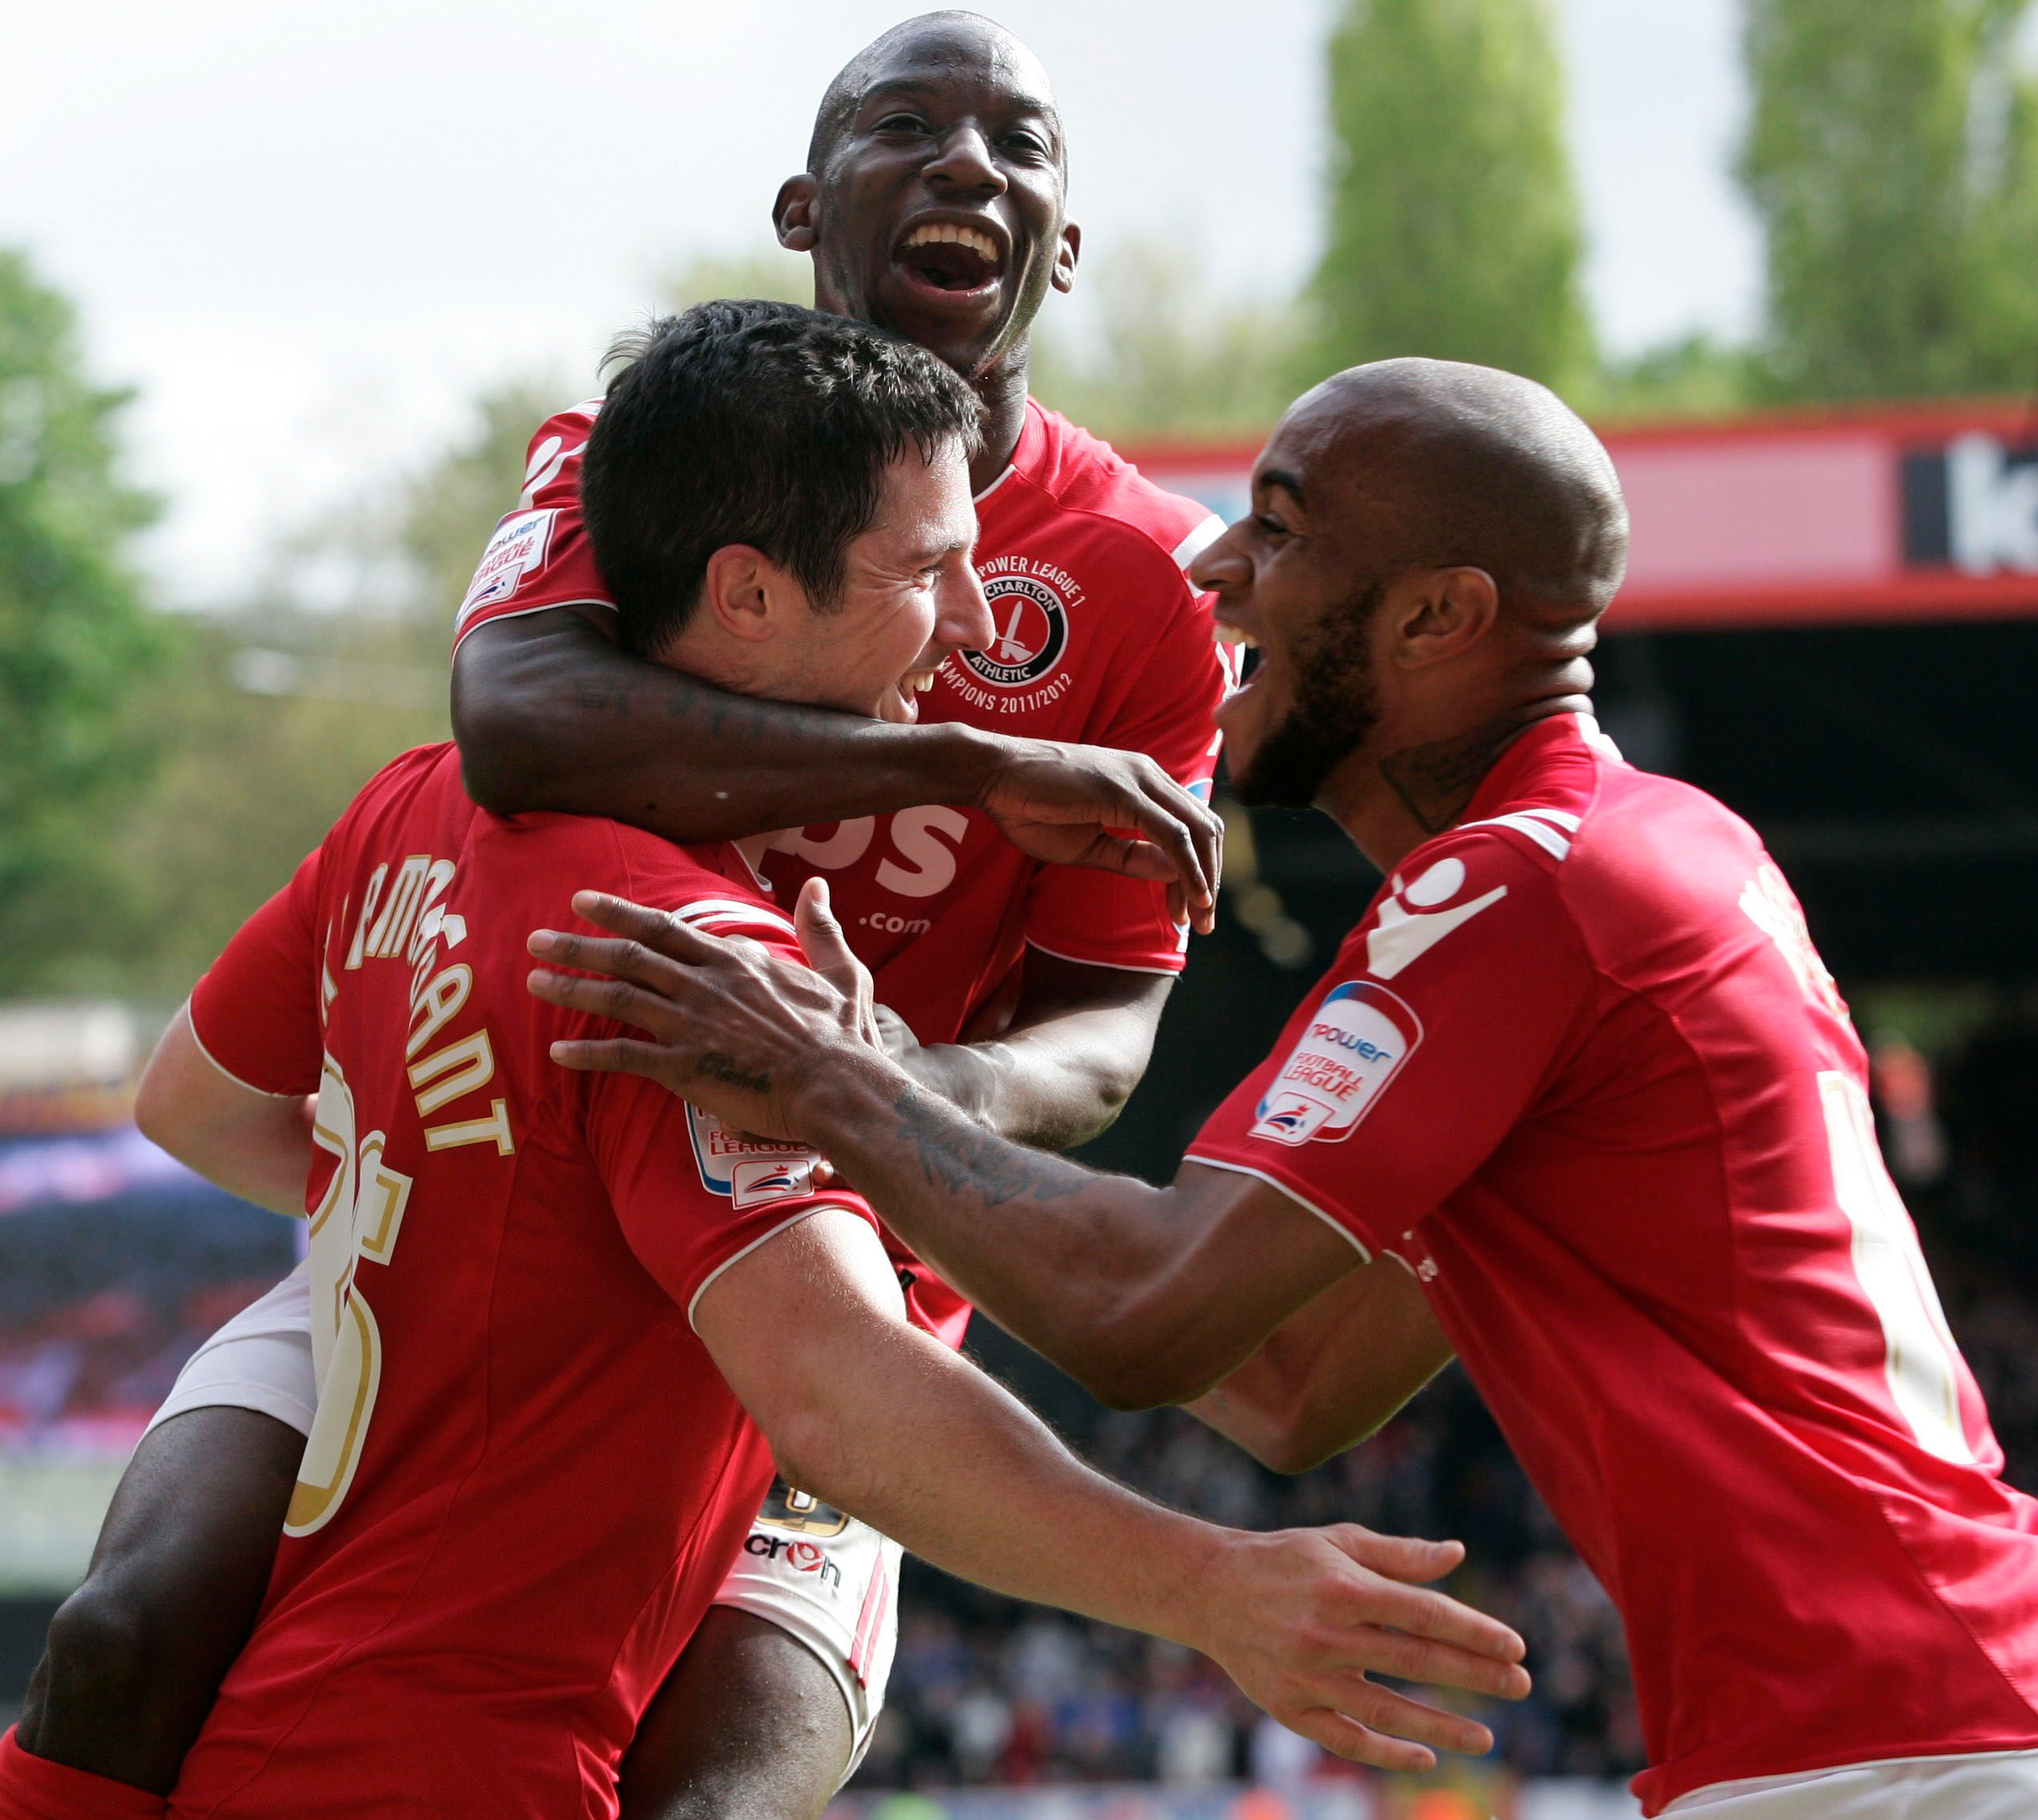 Football - Charlton Athletic v Hartlepool United npower Football League One  - The Valley - 5/5/12 
Yann Kermorgant celebrates scoring their first goal with Bradley Wright Phillips and Danny Haynes (R) 
Mandatory Credit: Action Images / Frances Leader 
Livepic 
EDITORIAL USE ONLY. No use with unauthorized audio, video, data, fixture lists, club/league logos or live services. Online in-match use limited to 45 images, no video emulation. No use in betting, games or single club/league/player public